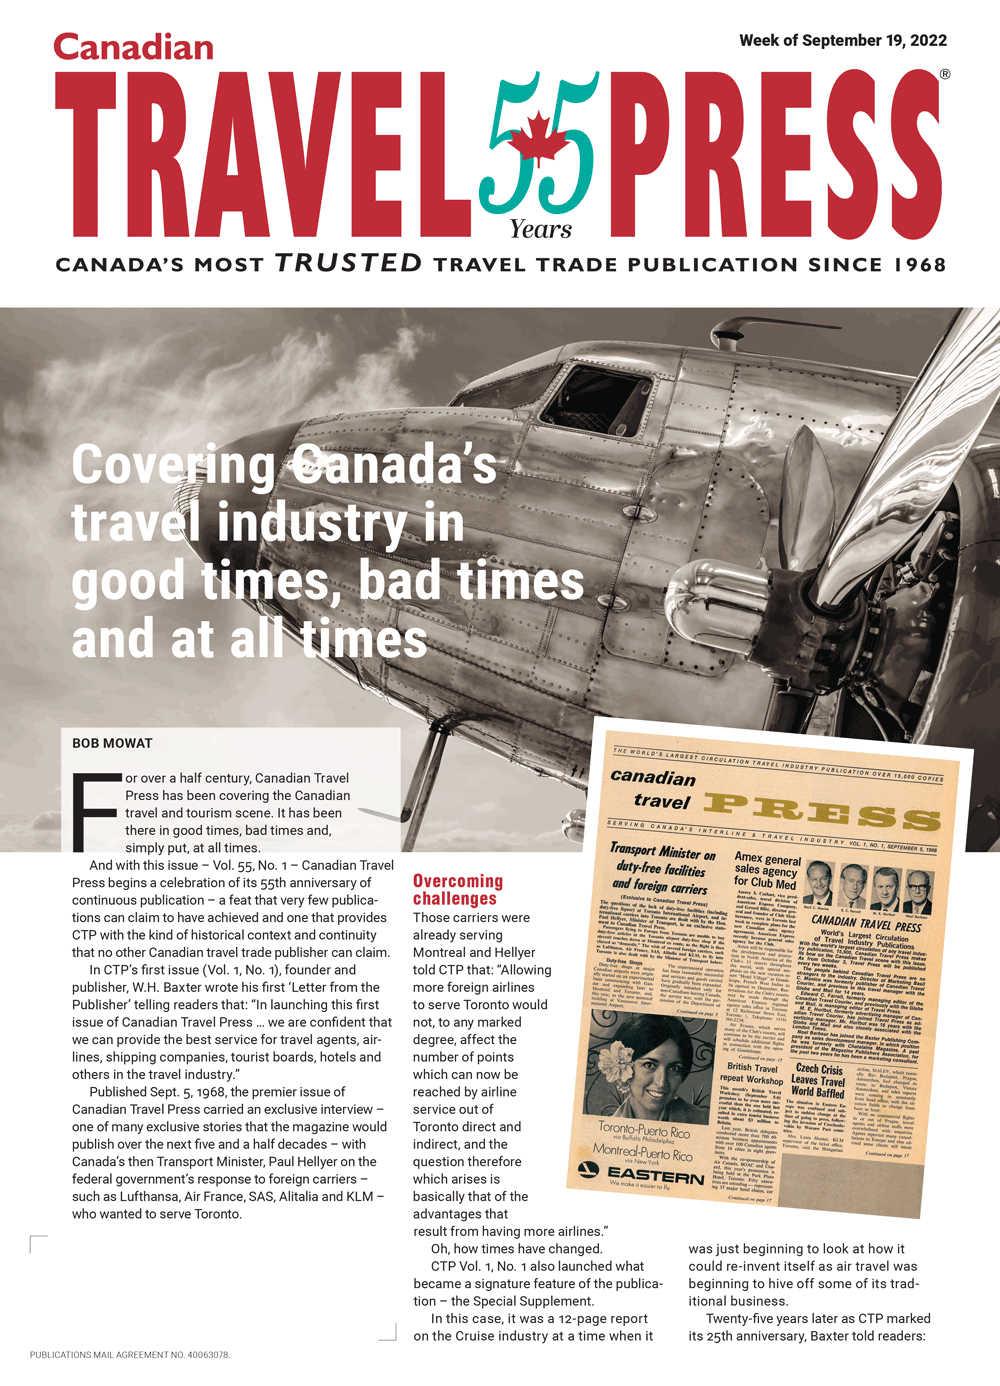 Canadian Travel Press: Always Here For You